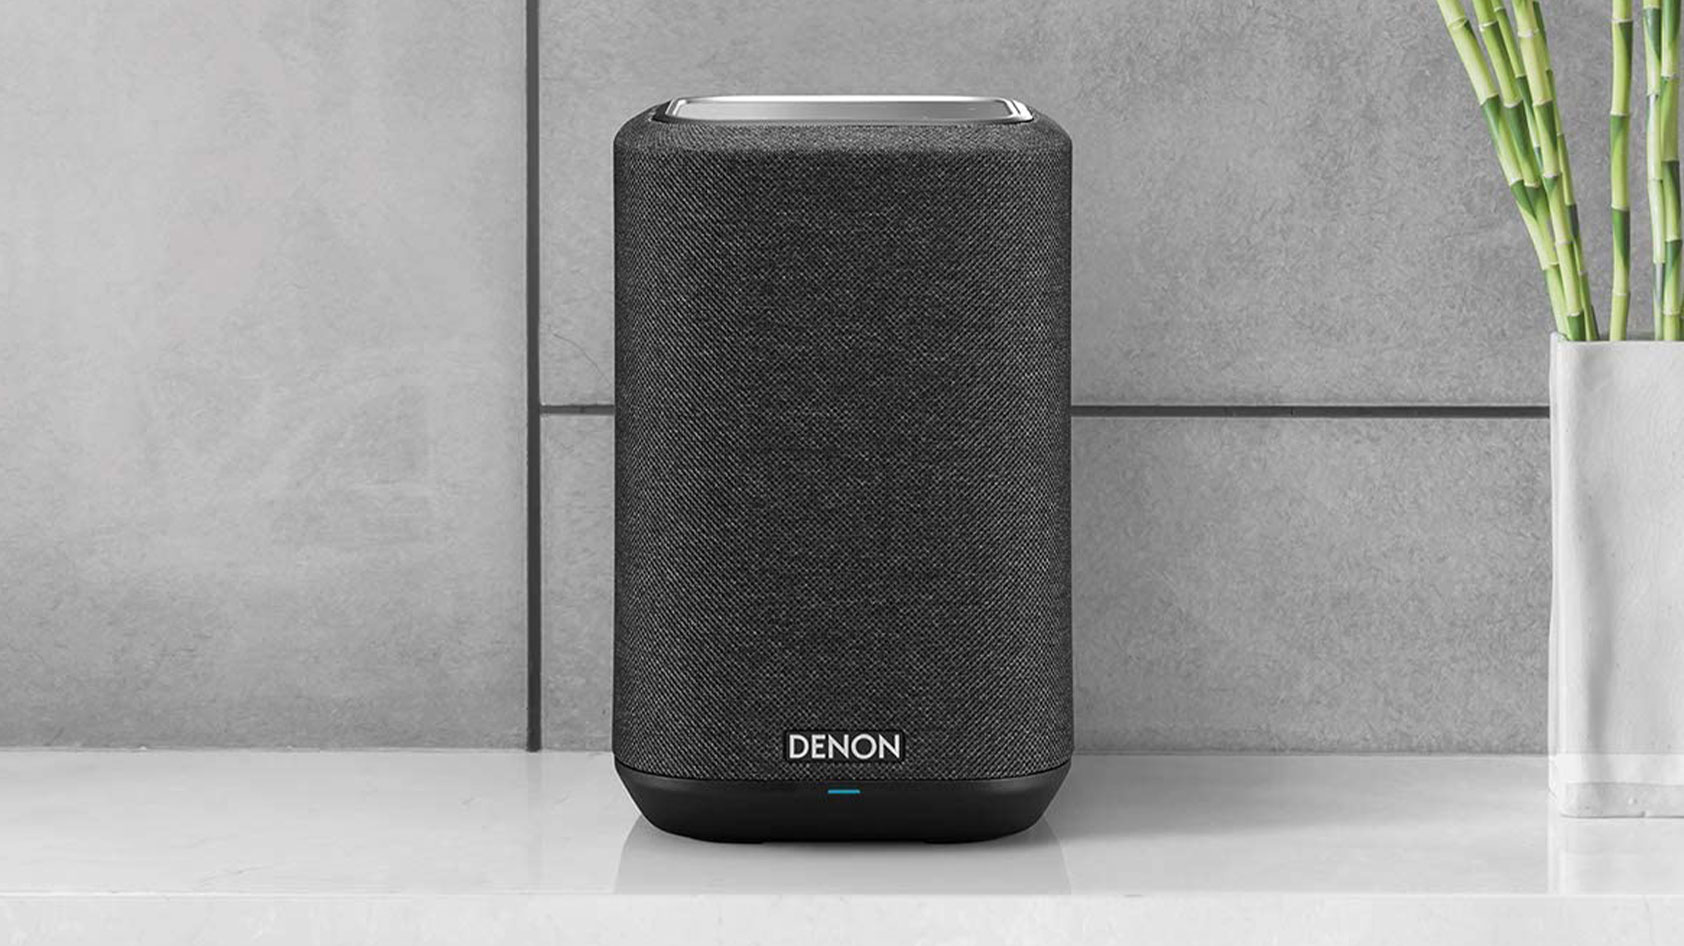 Image of a Denon Home 150 Wireless speaker on a countertop